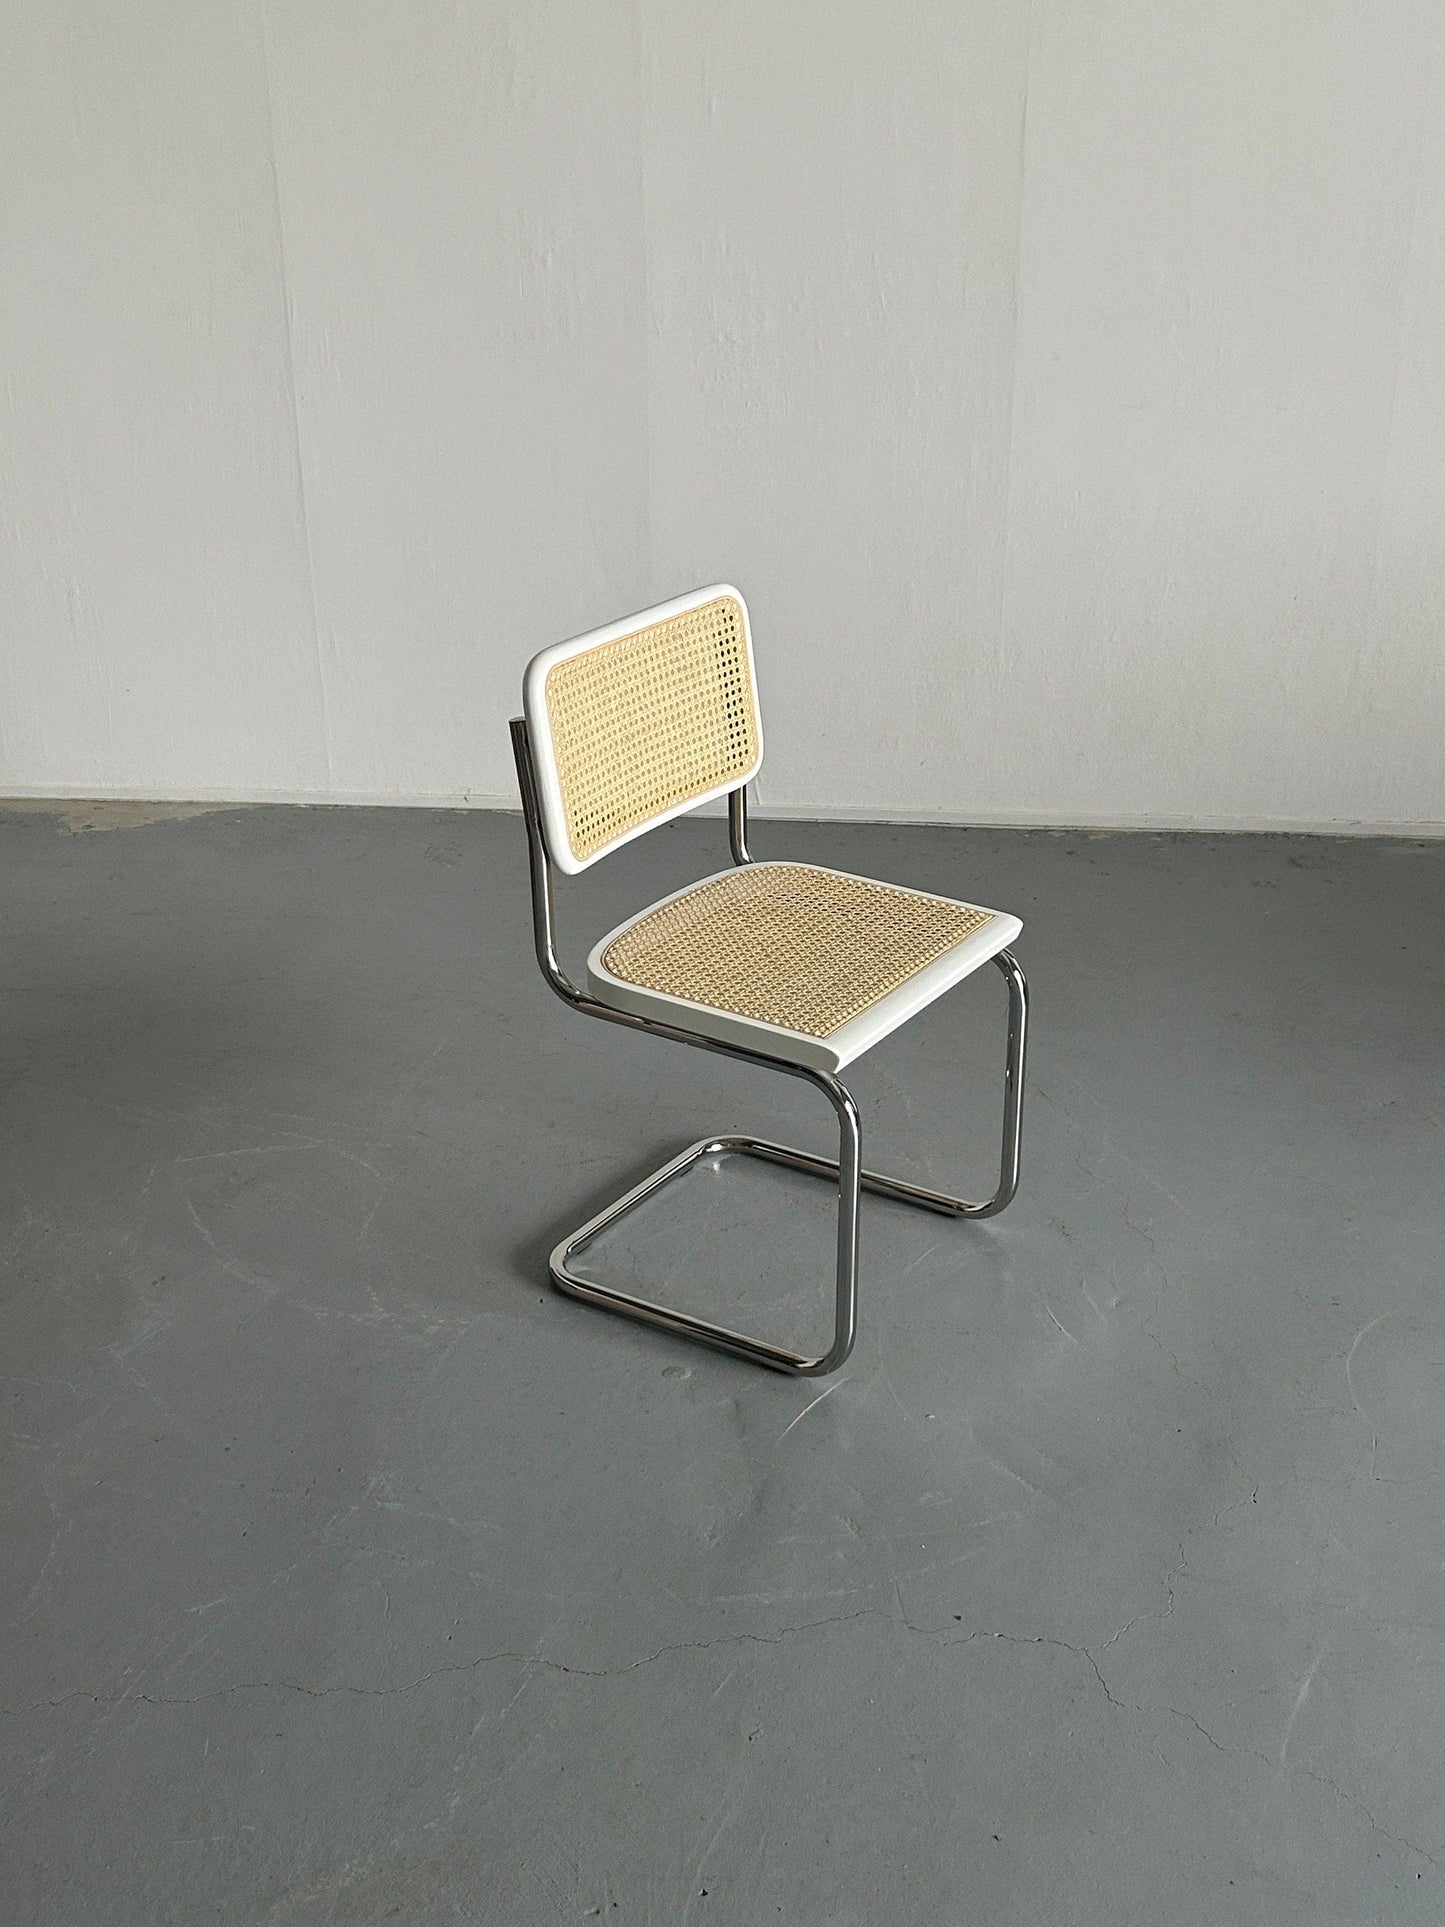 1 of 12 Cesca Mid-Century Modern Cantilever Chair / White Marcel Breuer B32 Design Chairs / Bauhaus Design / Early 2000s, Italy Vintage